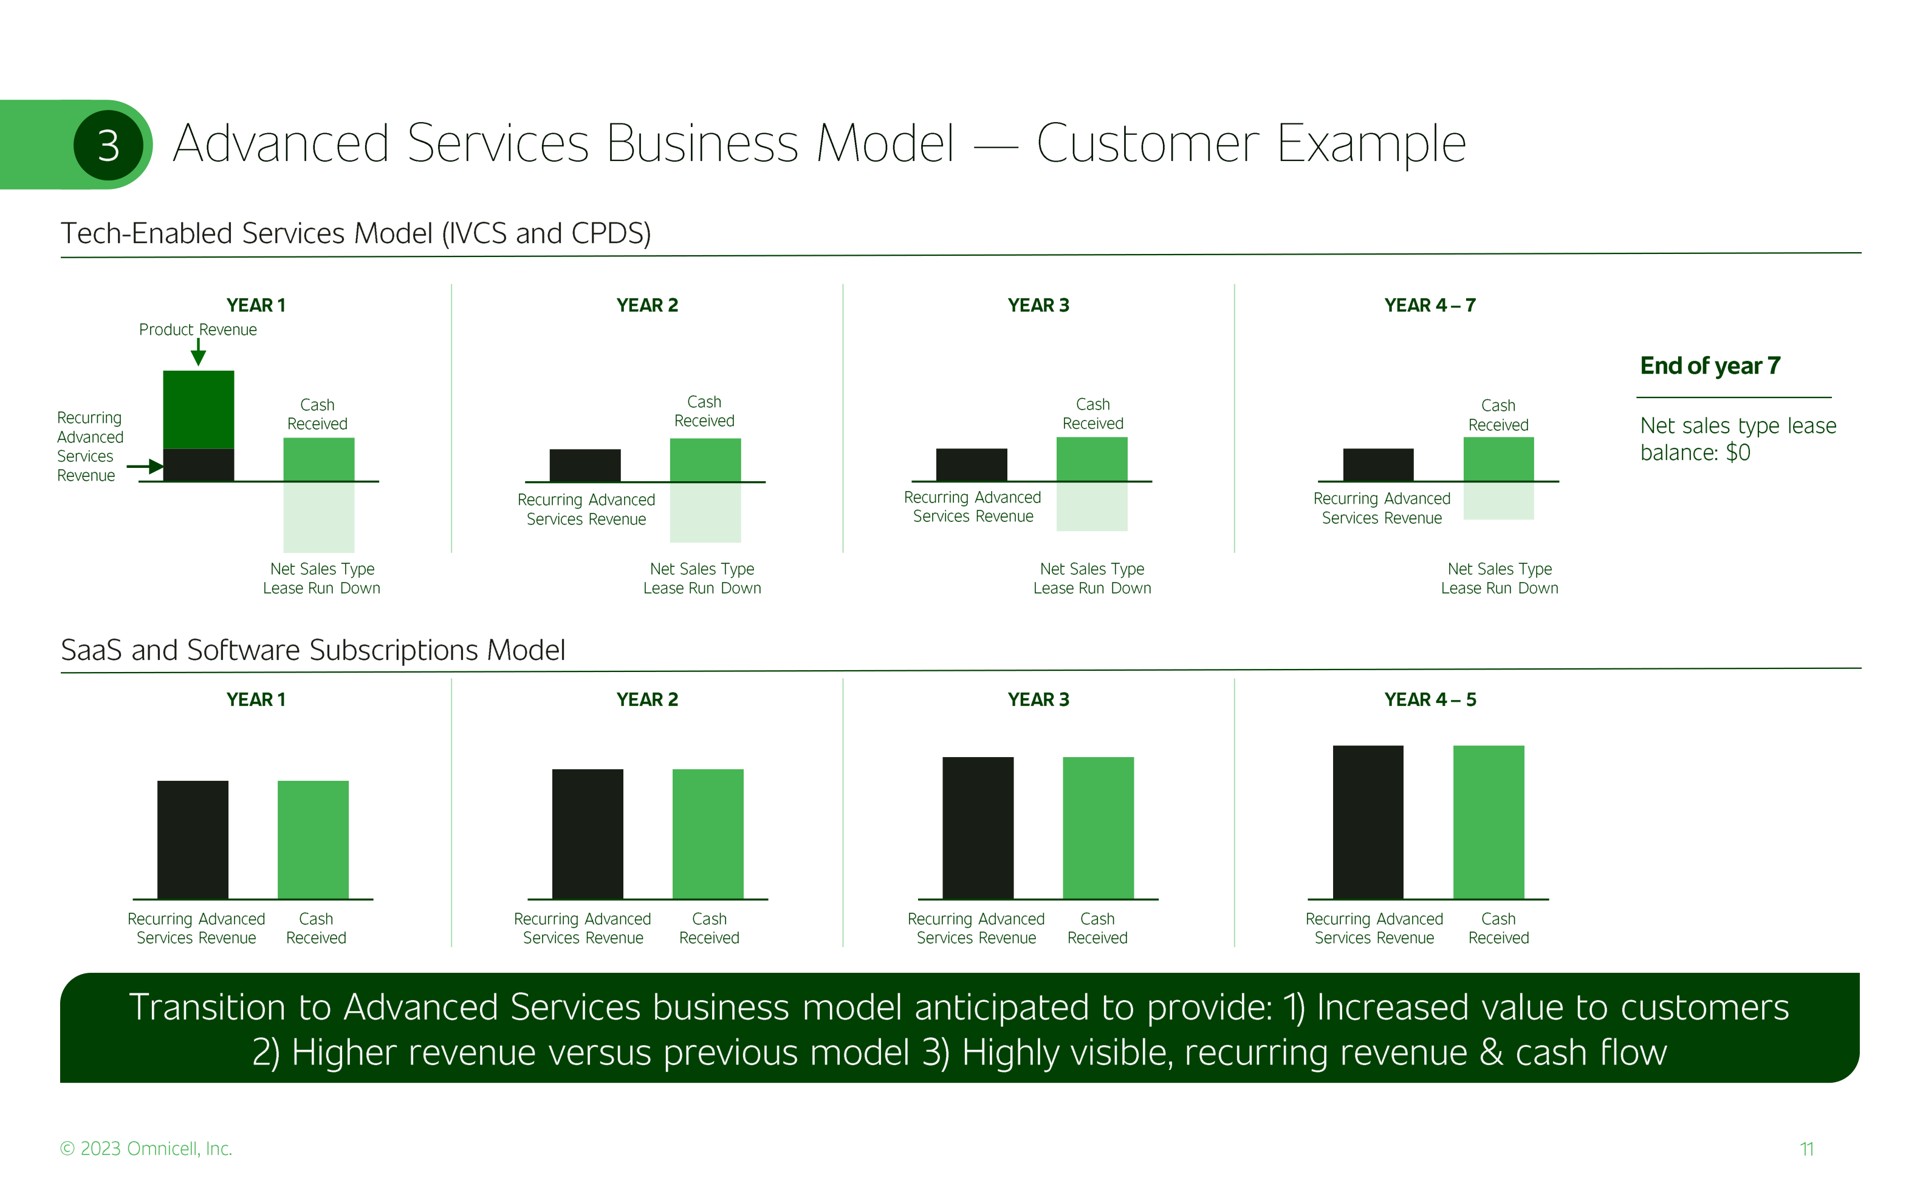 advanced services business model customer example transition to advanced services business model anticipated to provide increased value to customers higher revenue versus previous model highly visible recurring revenue cash flow | Omnicell